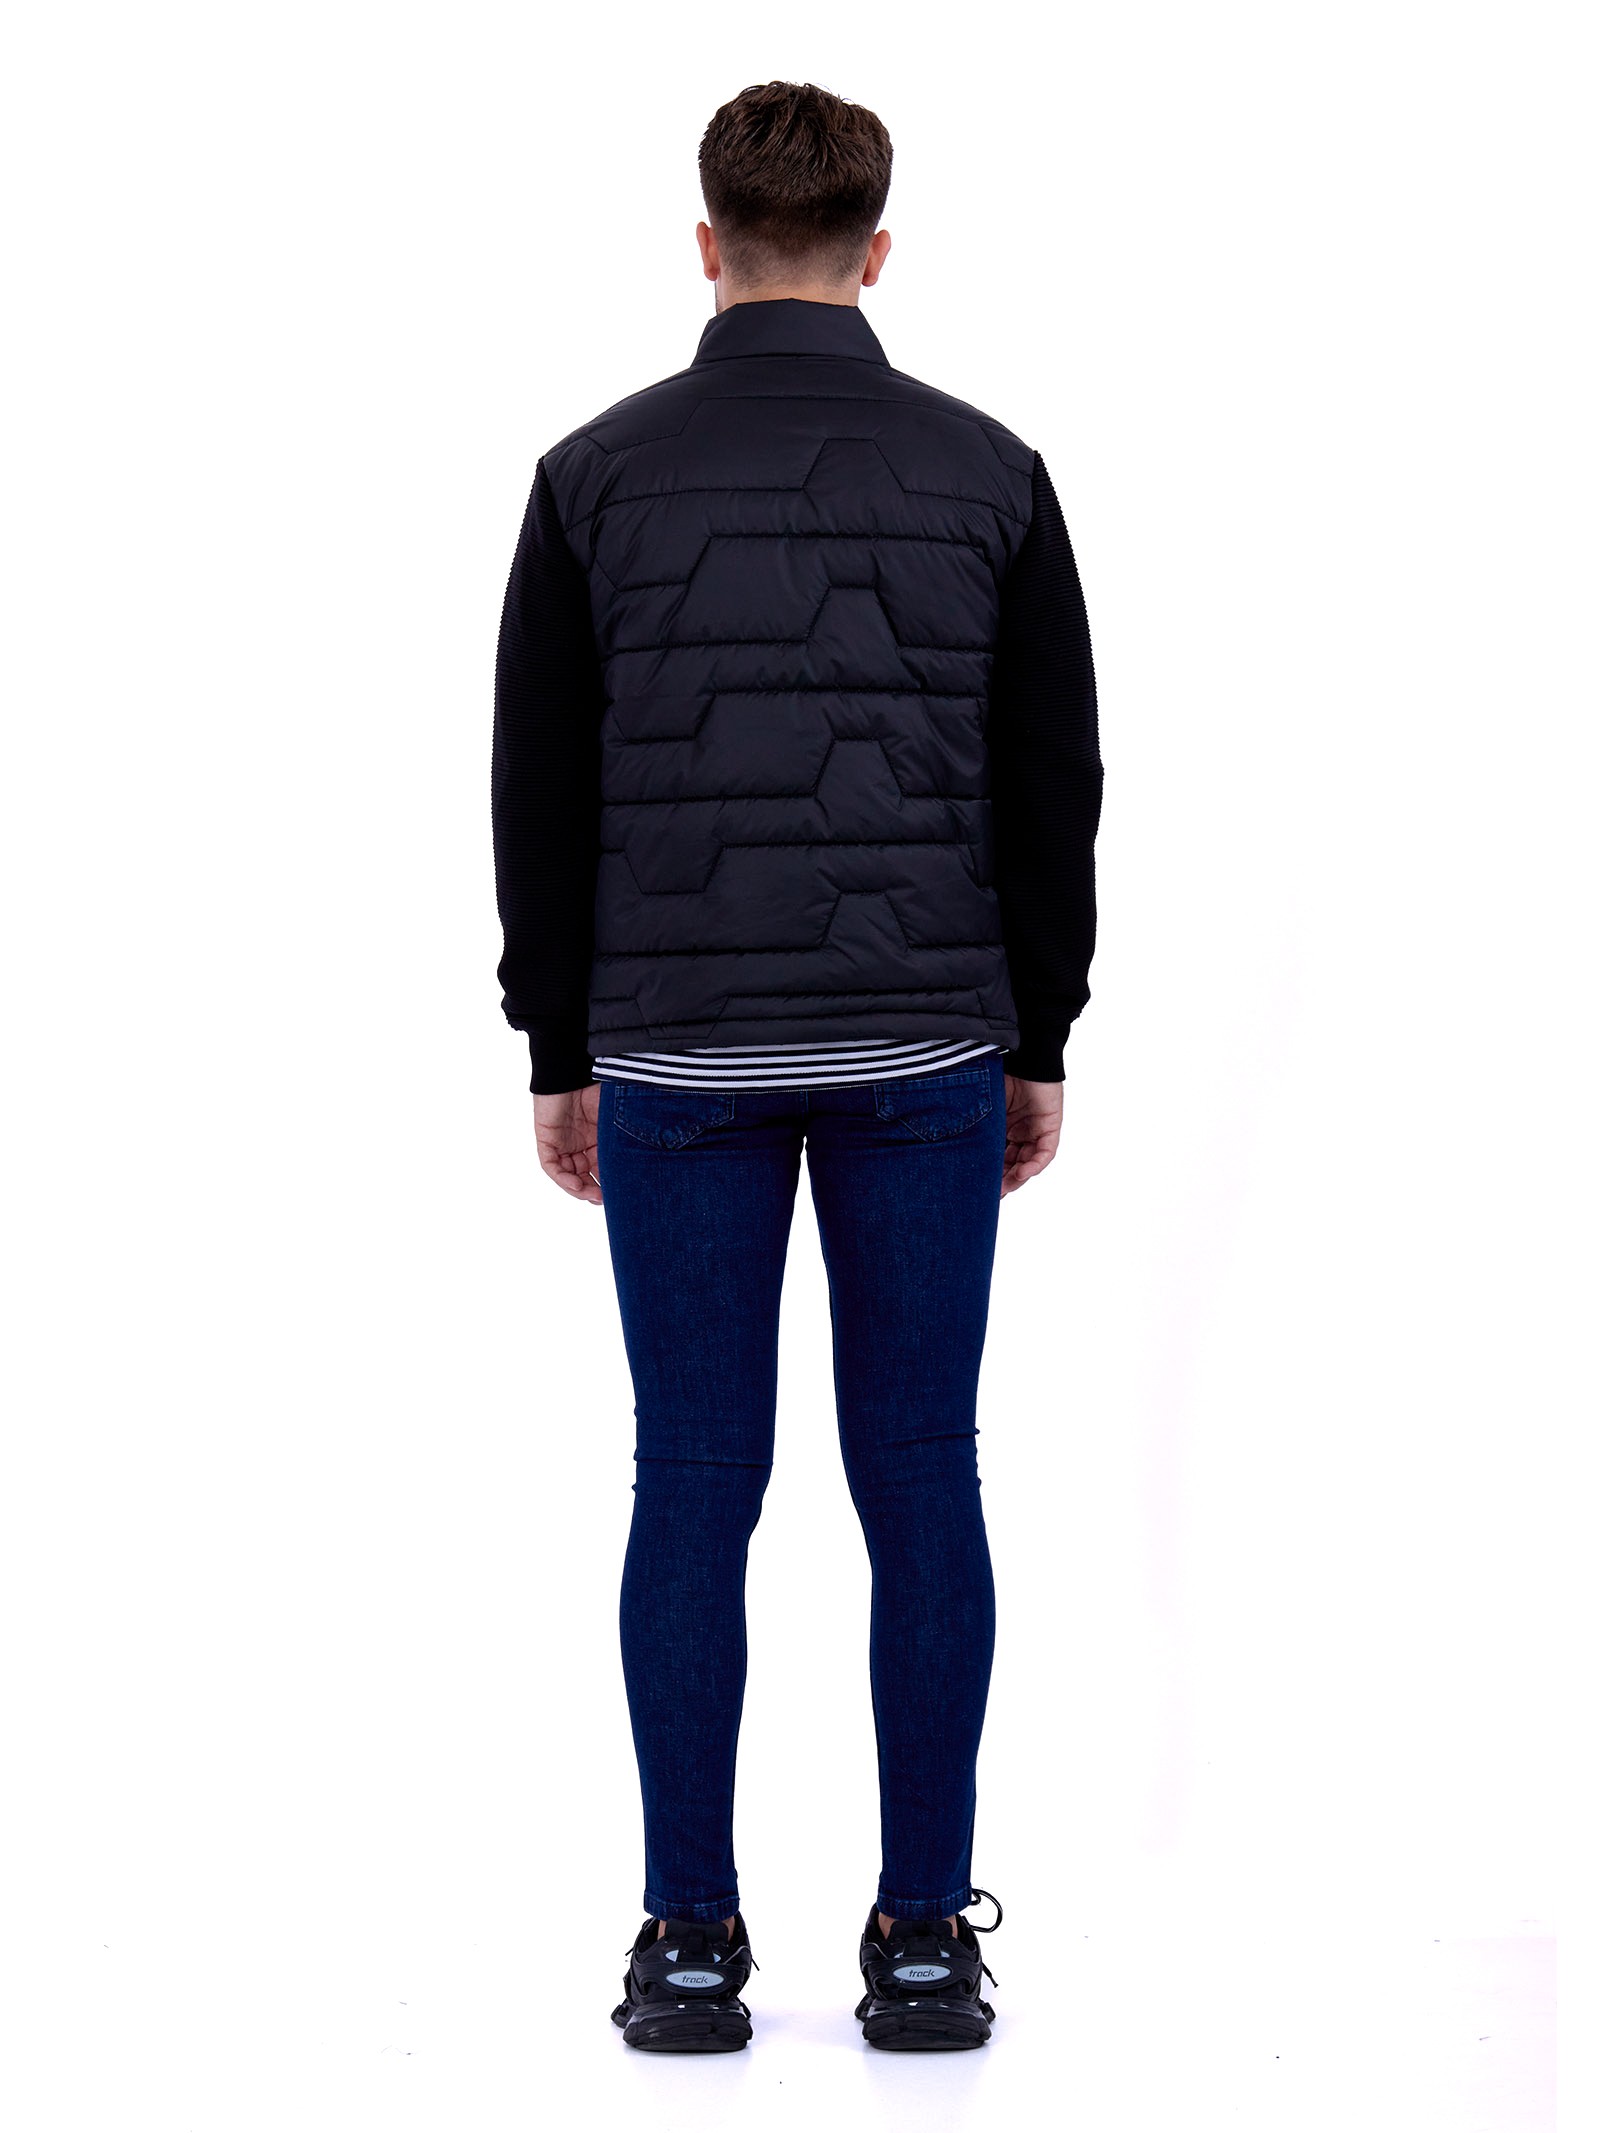 Winter jacket with knitted sleeves Black